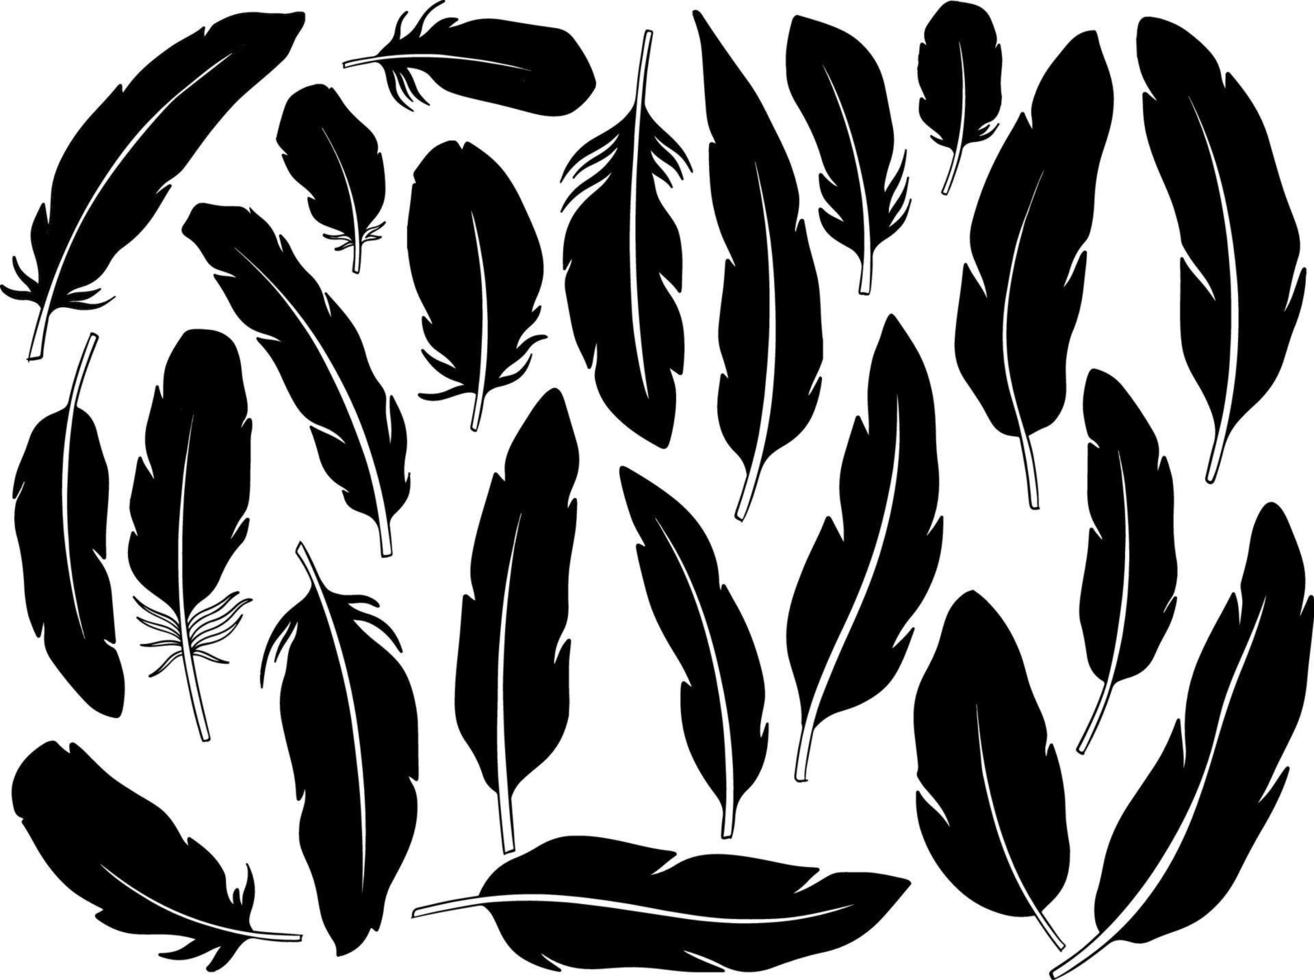 Feather boho set.Hand drawn style. vector